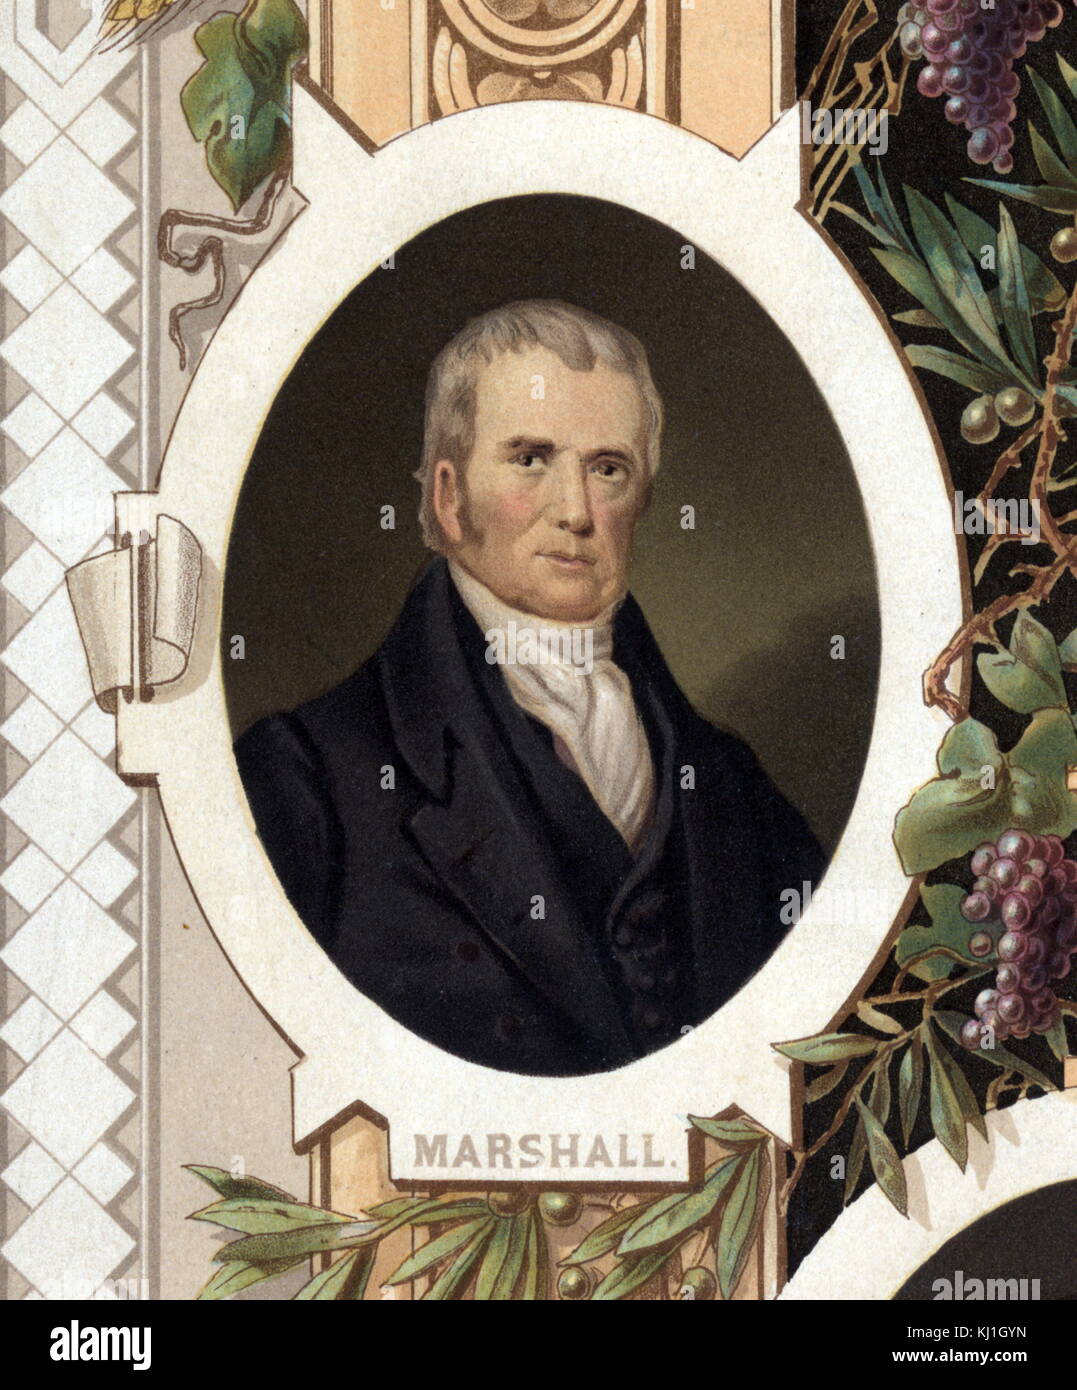 John Marshall (1755 – 1835) Chief Justice of the Supreme Court of the United States (1801–1835). Previously, Marshall had been a leader of the Federalist Party in Virginia and served in the United States House of Representatives from 1799 to 1800. He was Secretary of State under President John Adams from 1800 to 1801 Taken from an illustration of 1800 titled 'Distinguished masons of the revolution' Stock Photo